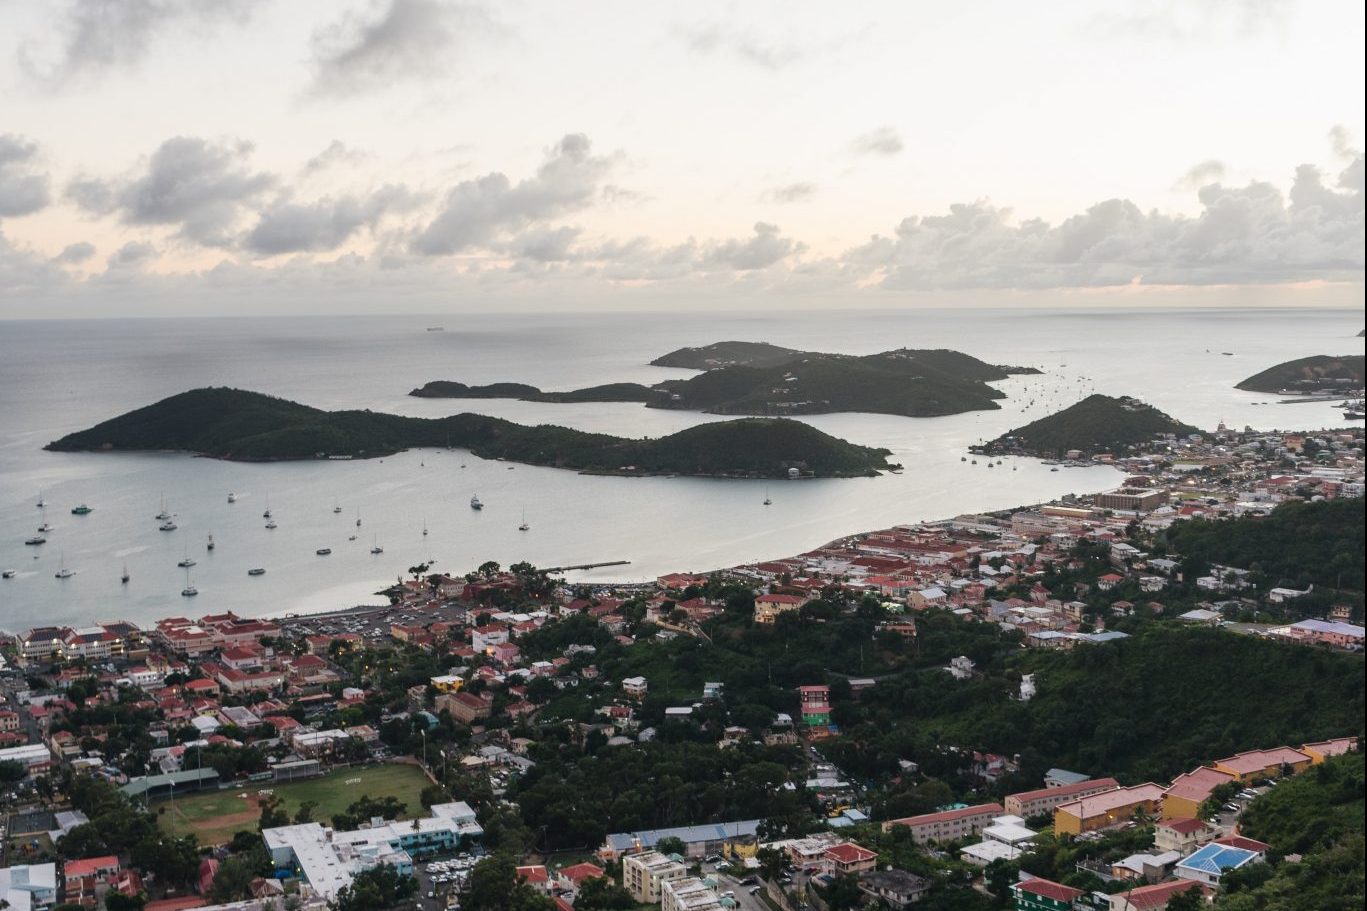 The U.S. Centers for Disease Control and Prevention (CDC) has now warned against travel to the U.S. Virgin Islands.